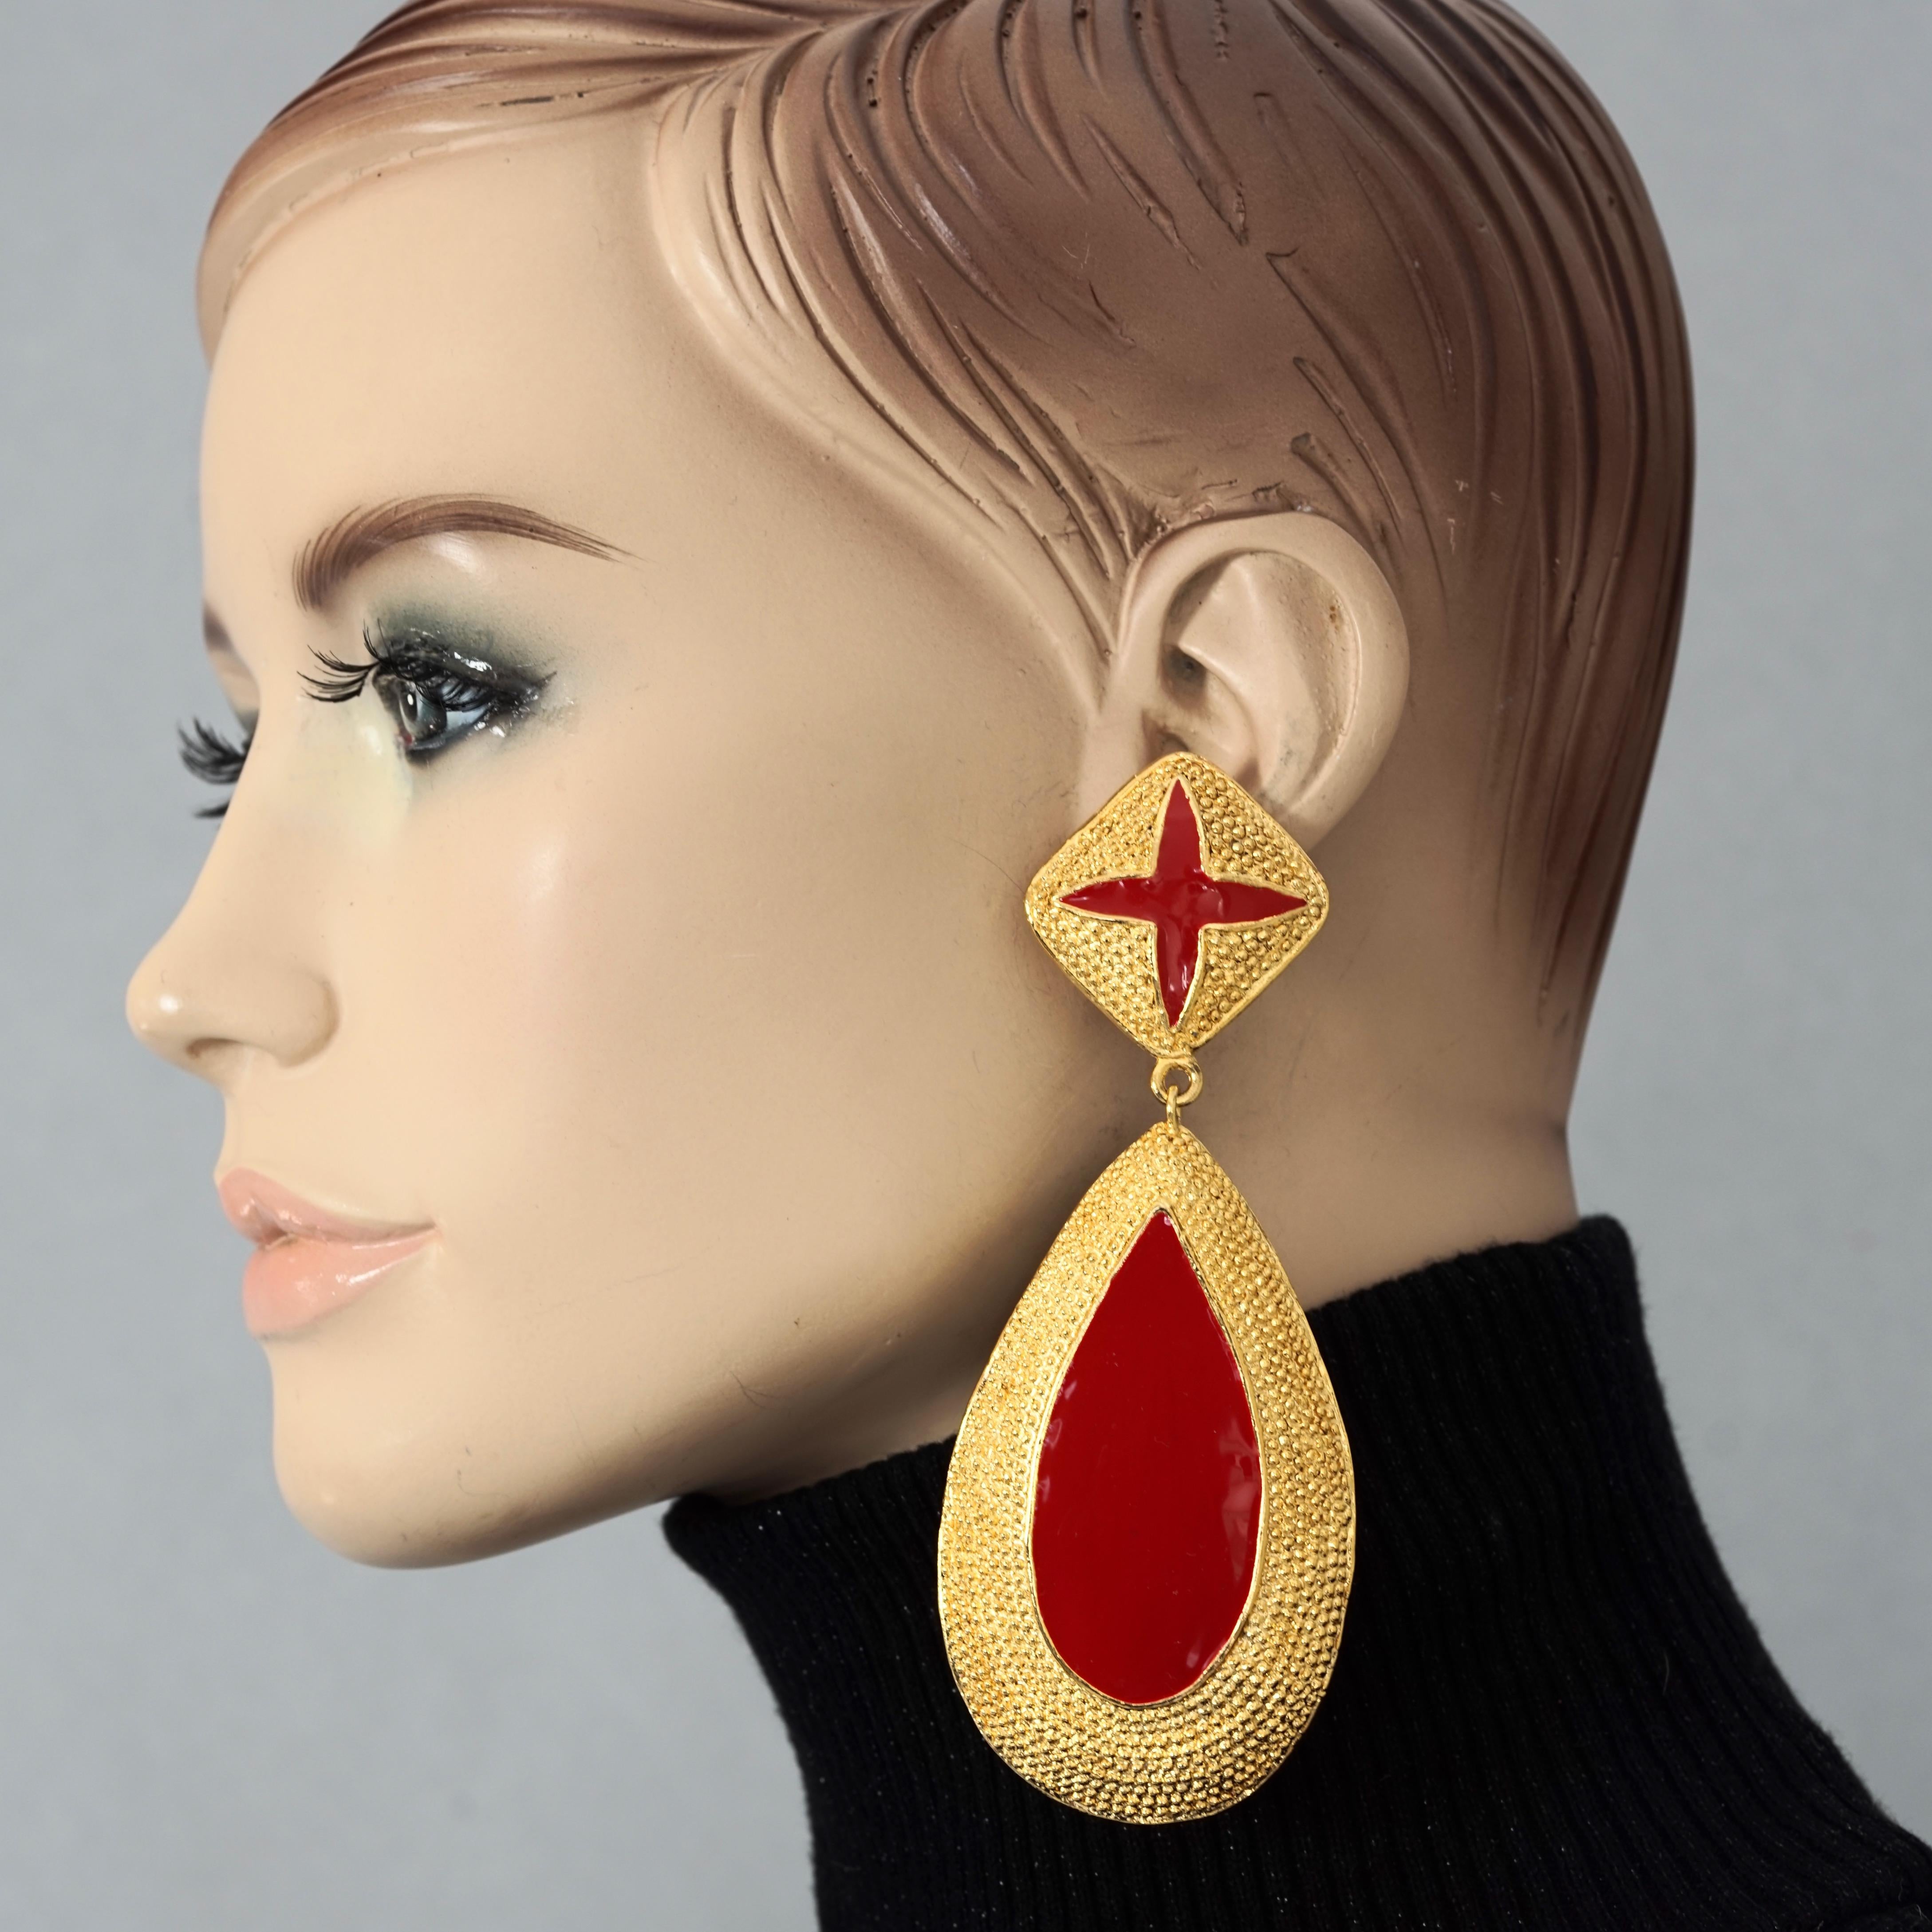 Vintage Massive VALENTINO Red Enamel Dangling Earrings

Measurements:
Height: 4.72 inches (12 cm)
Width: 1.85 inches (4.7 cm)
Weight per Earring: 46 grams

Features:
- 100% Authentic VALENTINO.
- Massive textured gilt dangling earrings with red